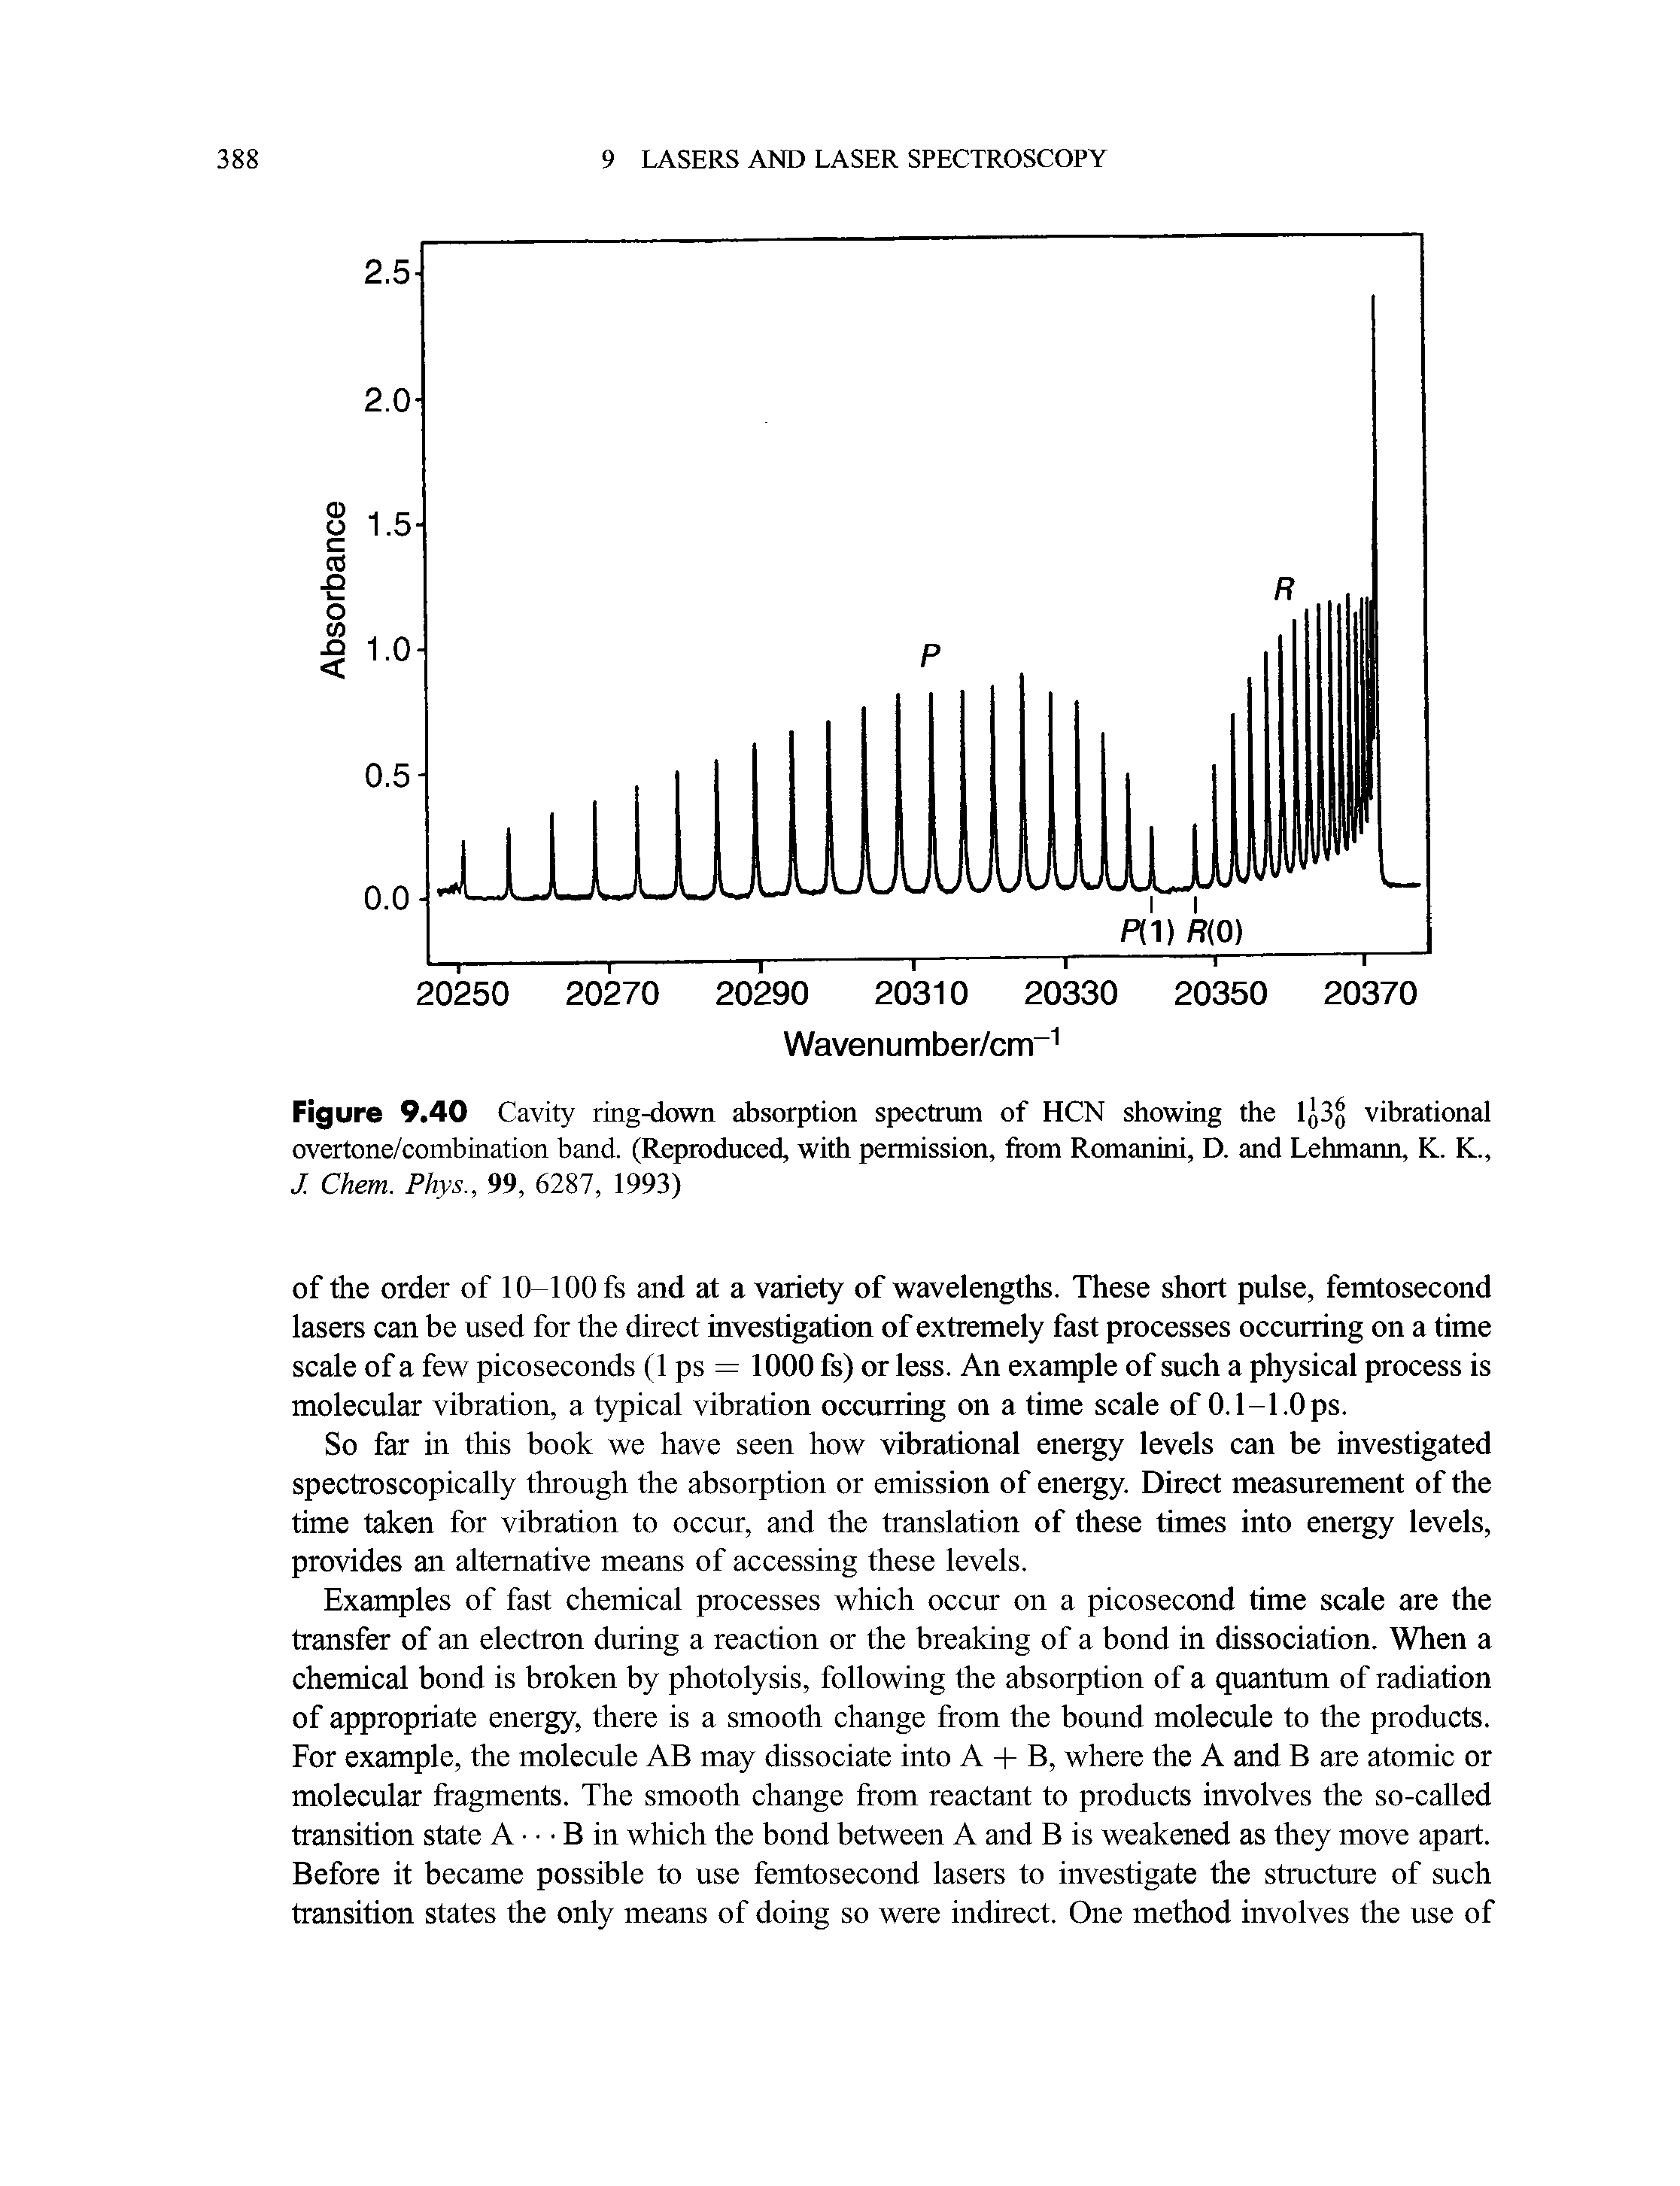 Figure 9.40 Cavity ring-down absorption spectrum of HCN showing the 1q3q vibrational overtone/combination band. (Reproduced, with permission, from Romanini, D. and Lehmann, K. K., J. Chem. Phys., 99, 6287, 1993)...